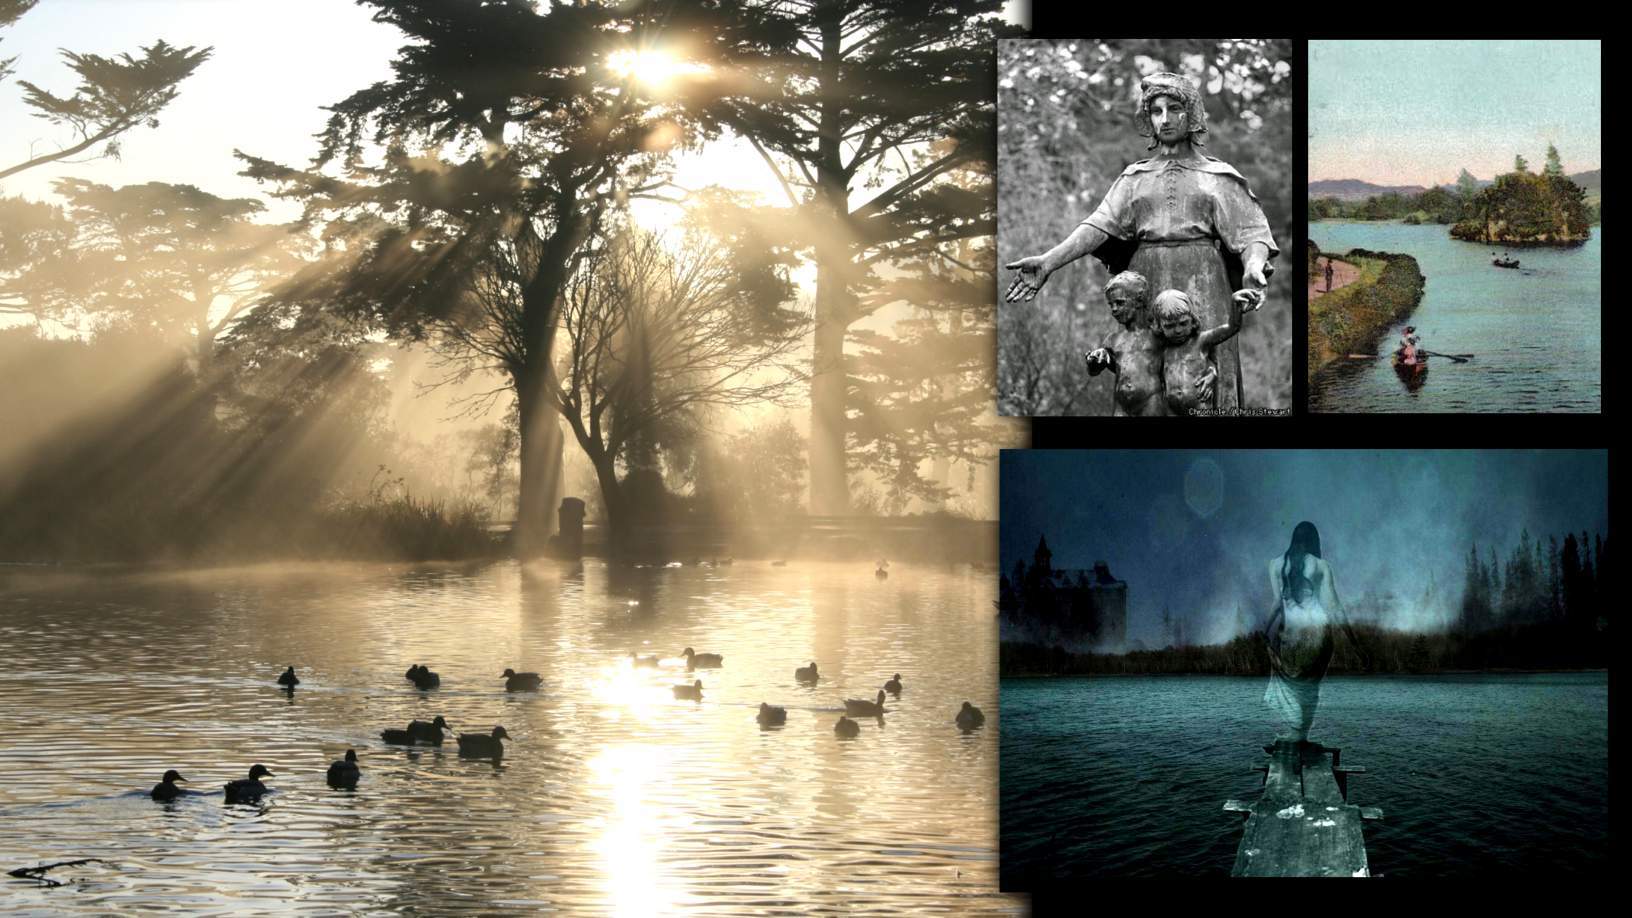 The ghost of Stow Lake in Golden Gate Park 2